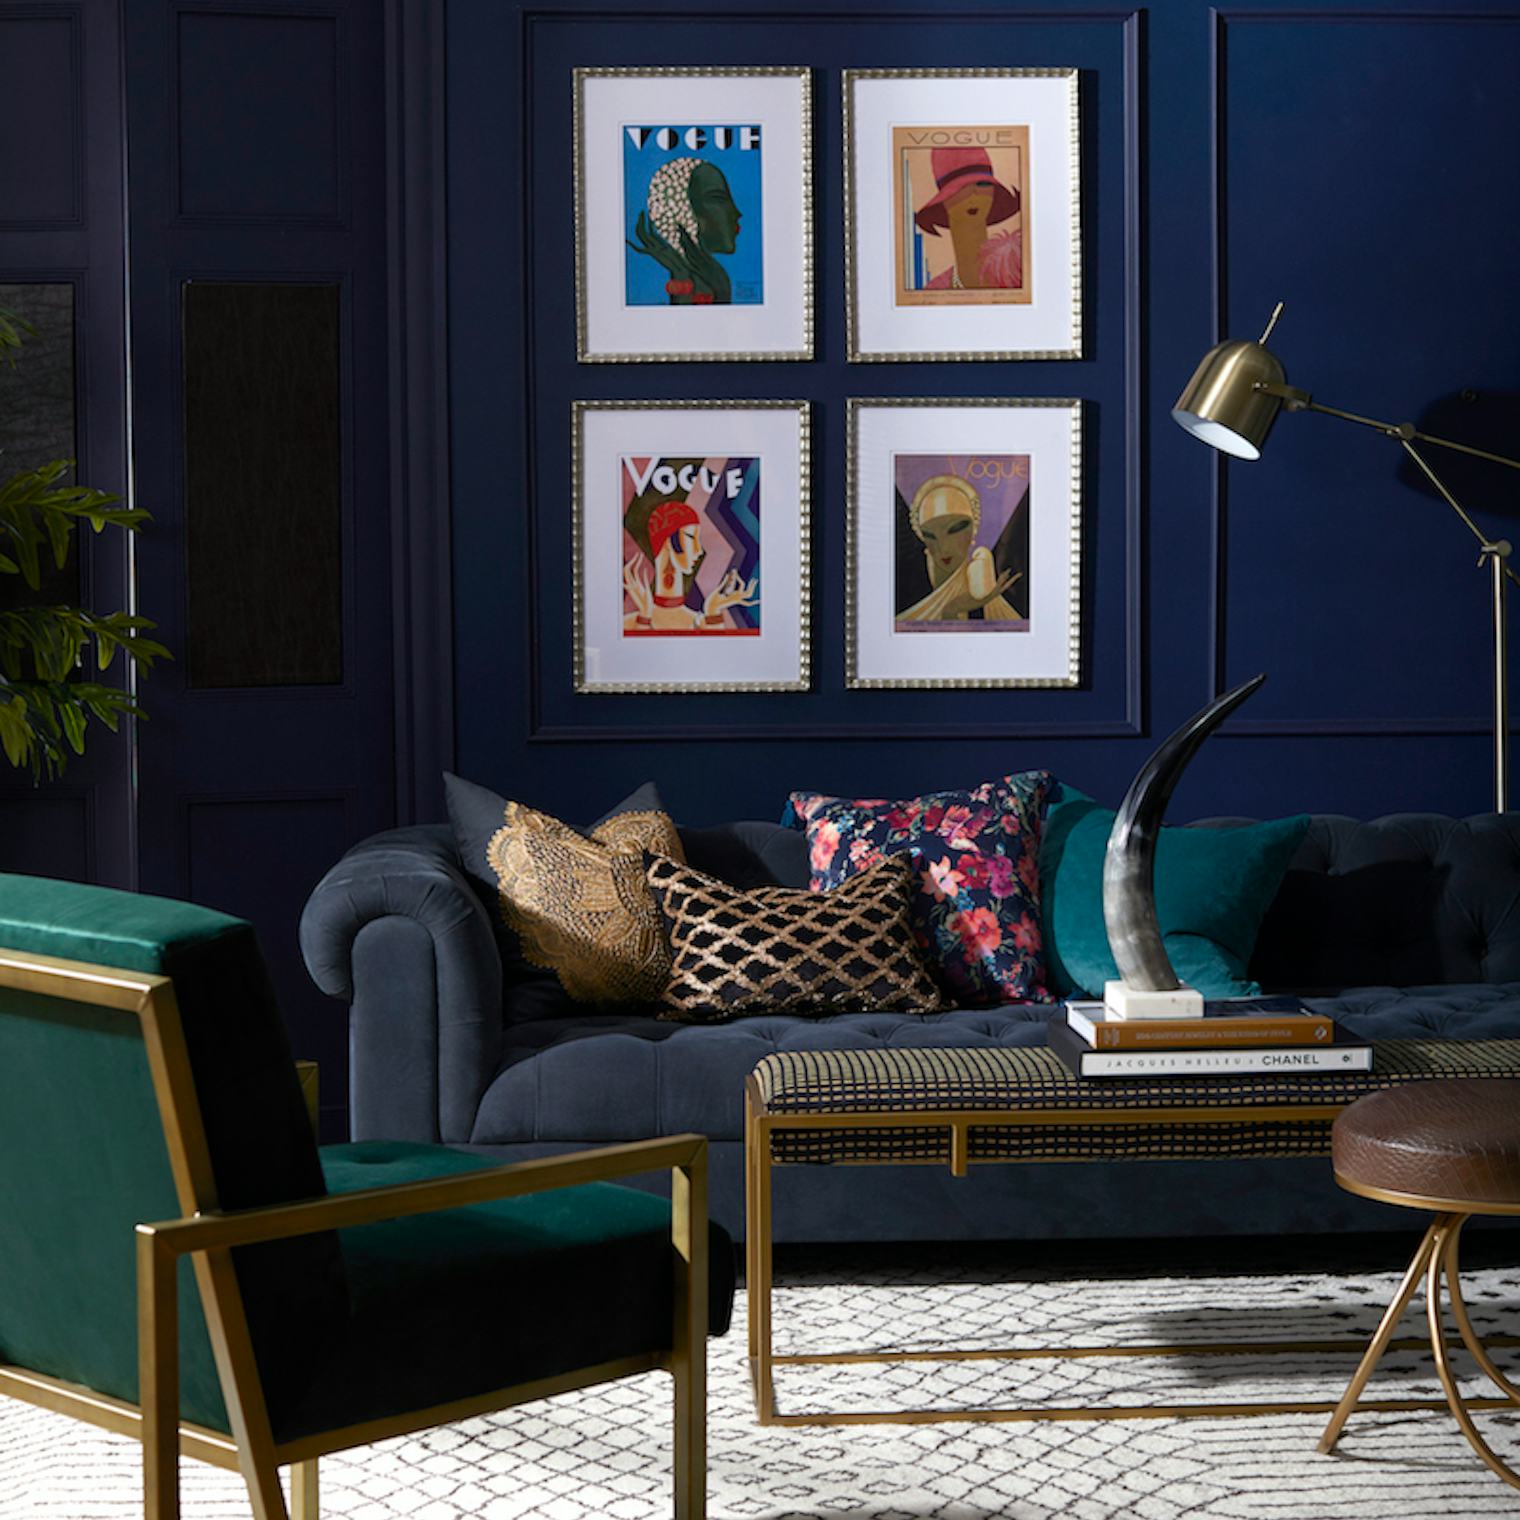 The #1 Color Trend To Incorporate Into Your Home In 2022